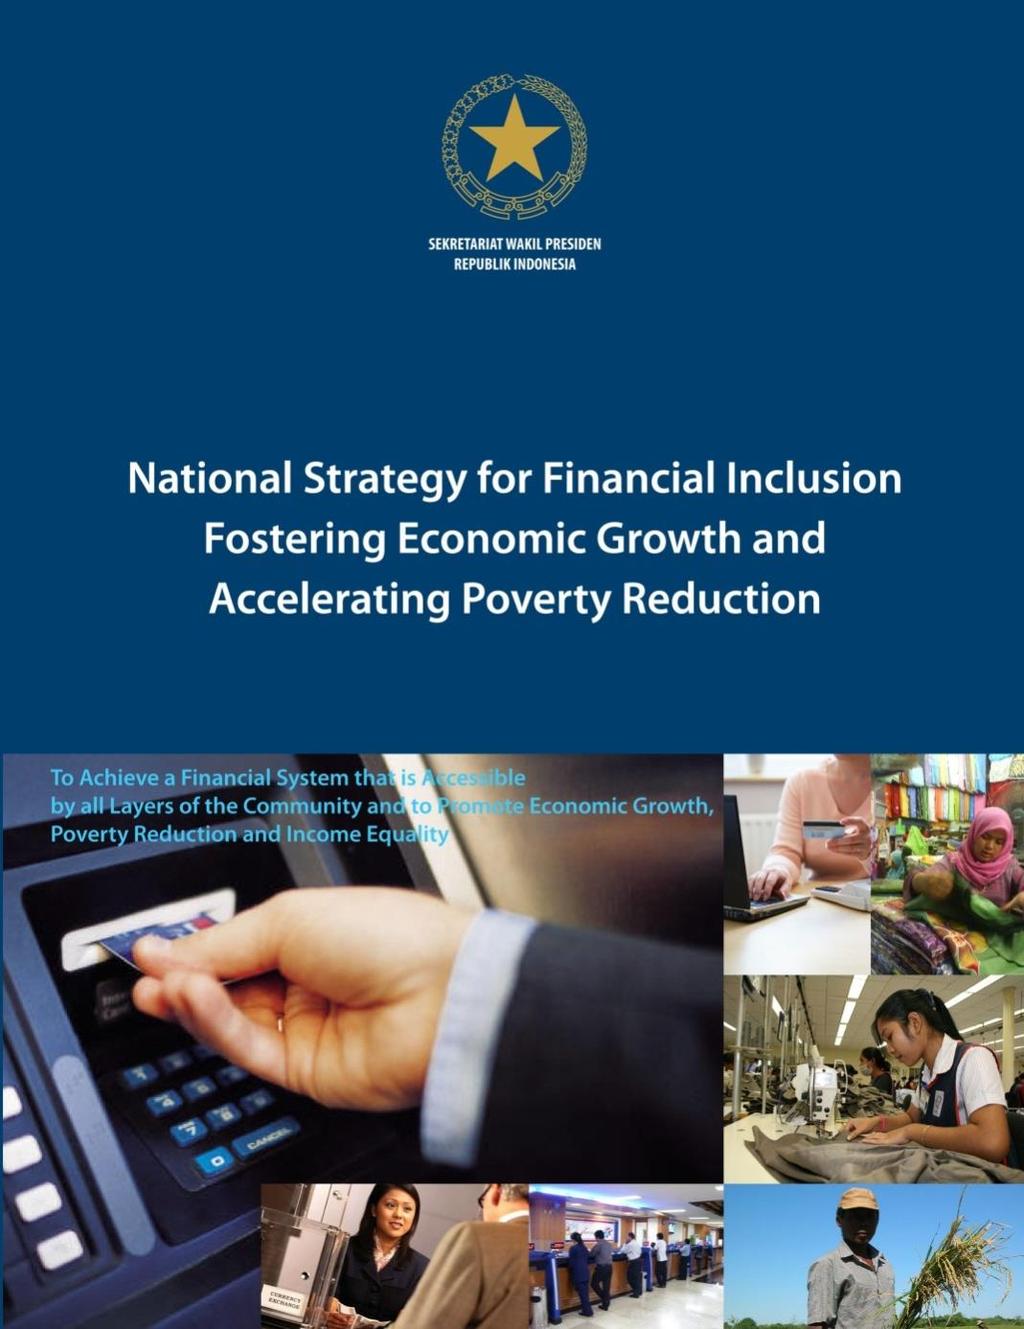 Chp. 1 VISION AND MISION FOR FINANCIAL INCLUSION 1. INTRODUCTION 2. RATIONAL FOR FINANCIAL INCLUSION 3. PRINCIPLES AND APPROACH TO FINANCIAL INCLUSION 4. THE VISION FOR FINANCIAL INCLUSION Chp.